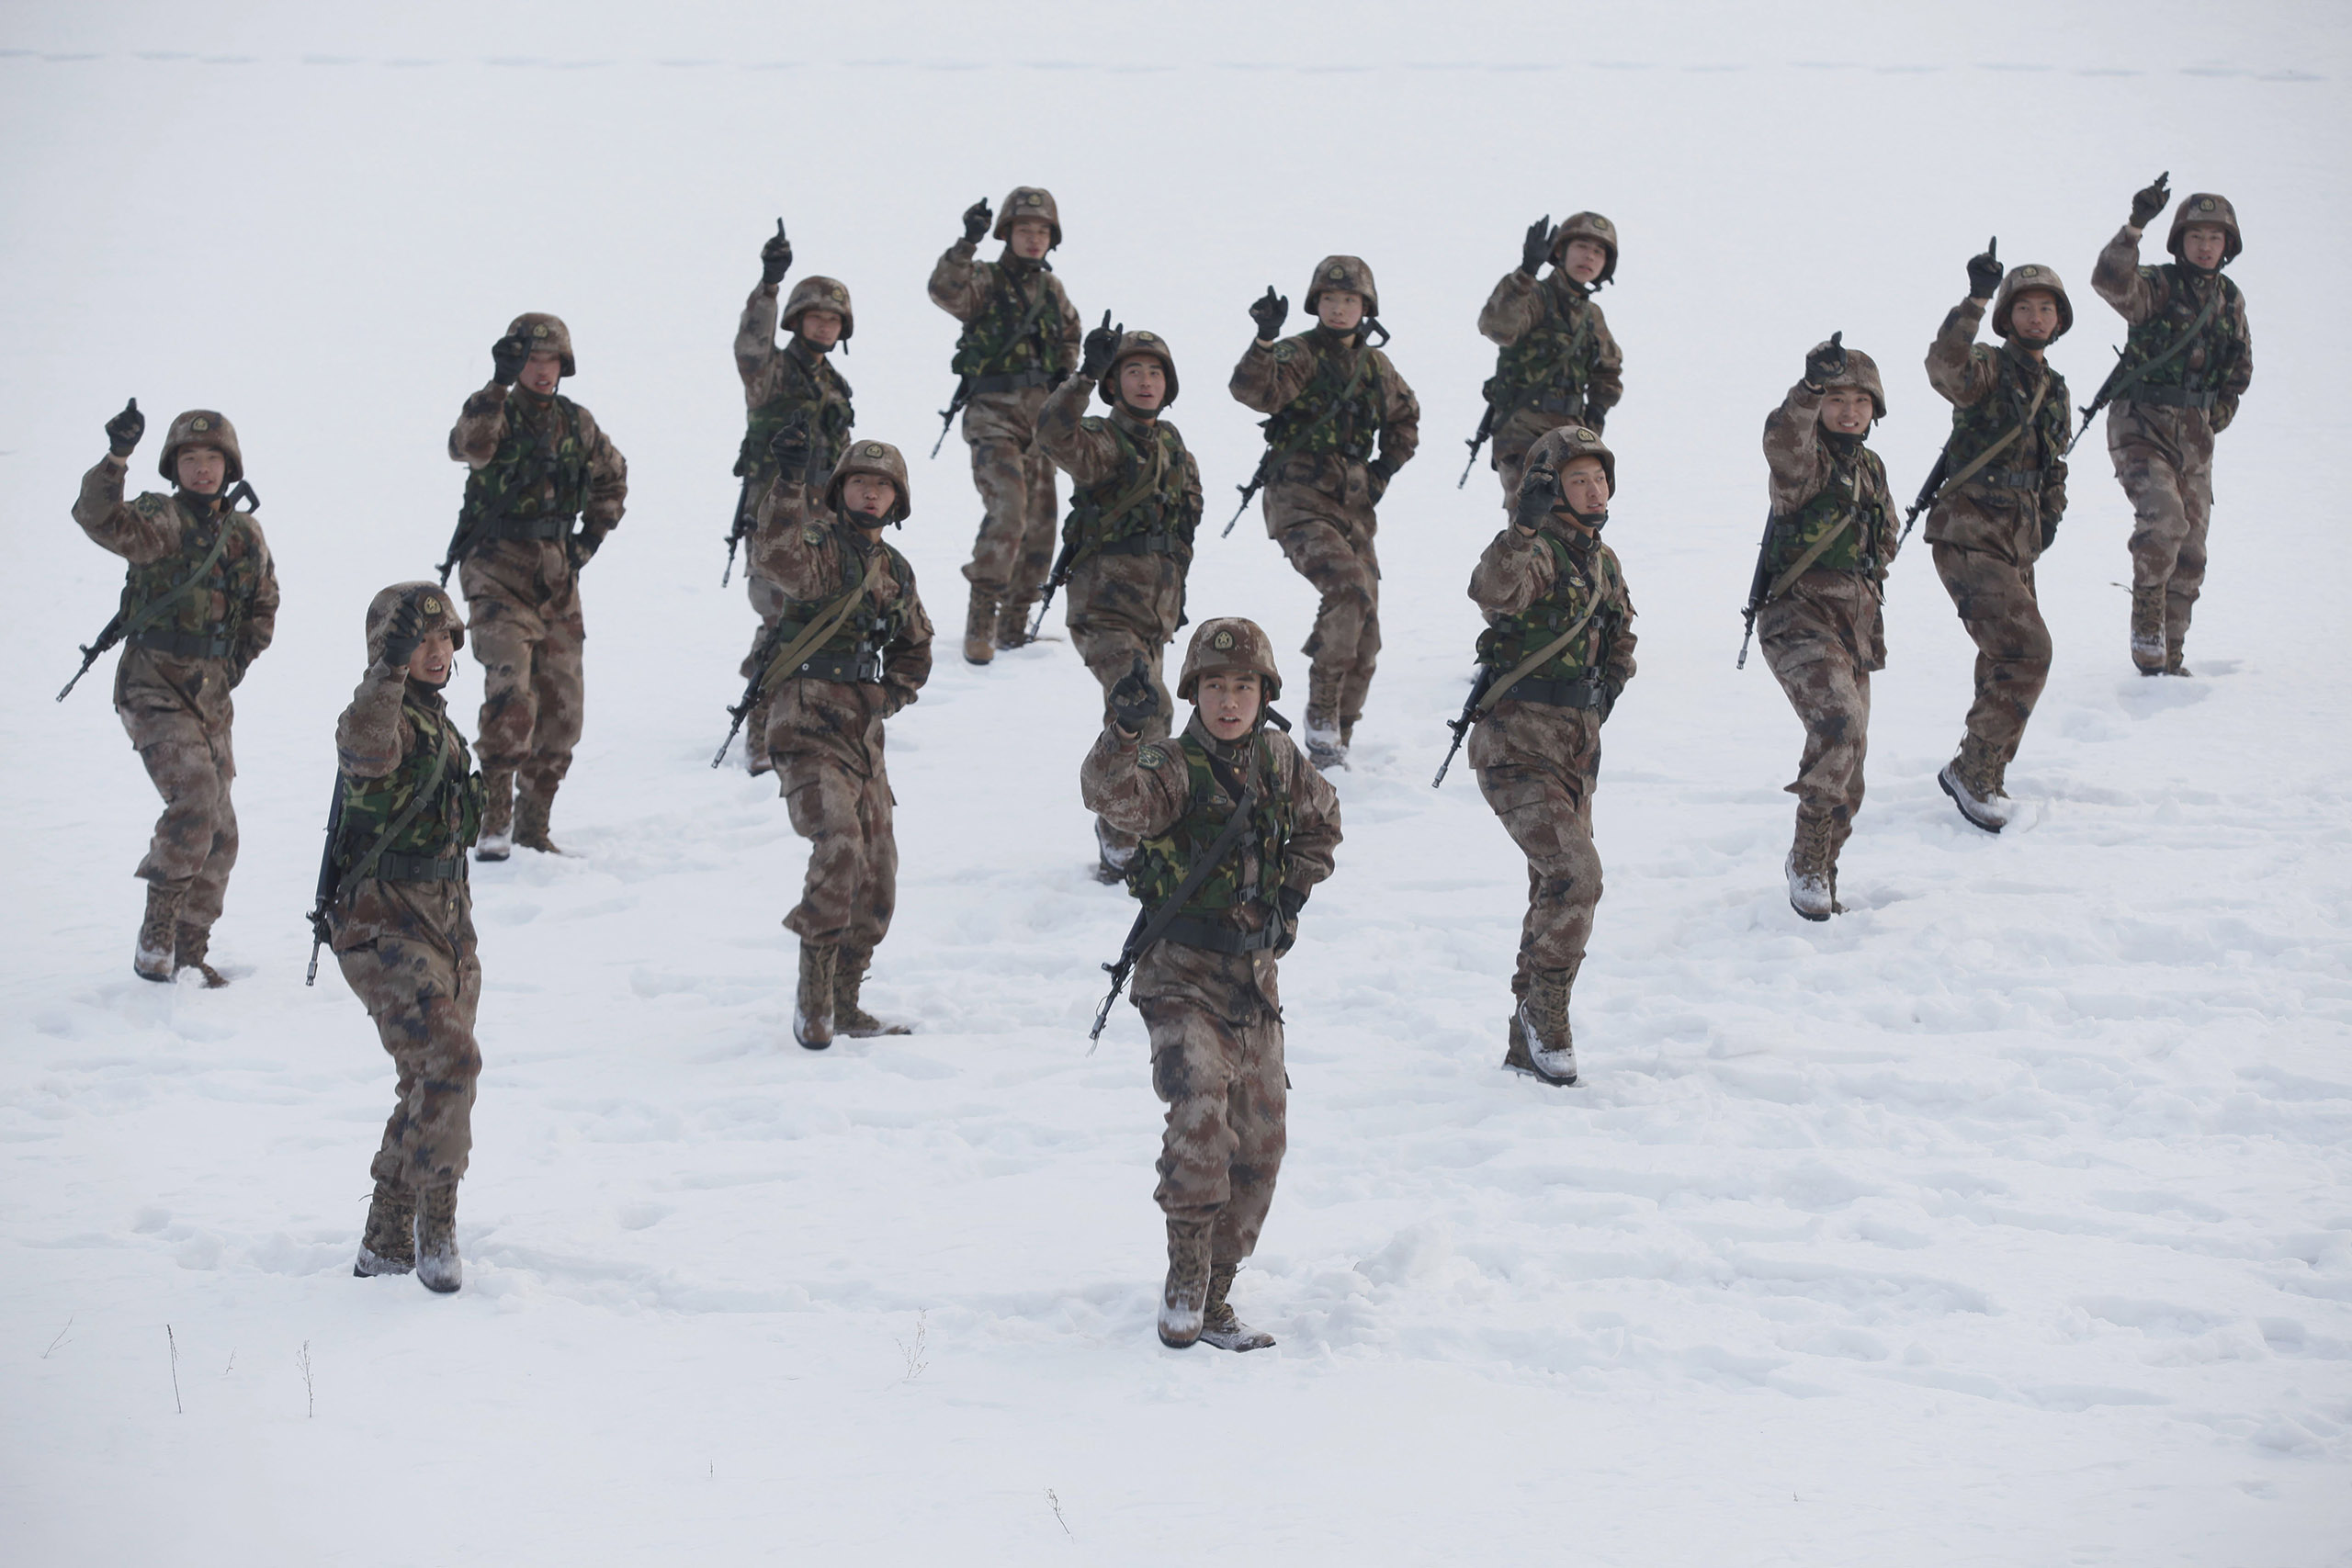 Soldiers perform the popular Little Apple dance in the snow during a training break on Nov. 11, 2014 in Heihe, China.